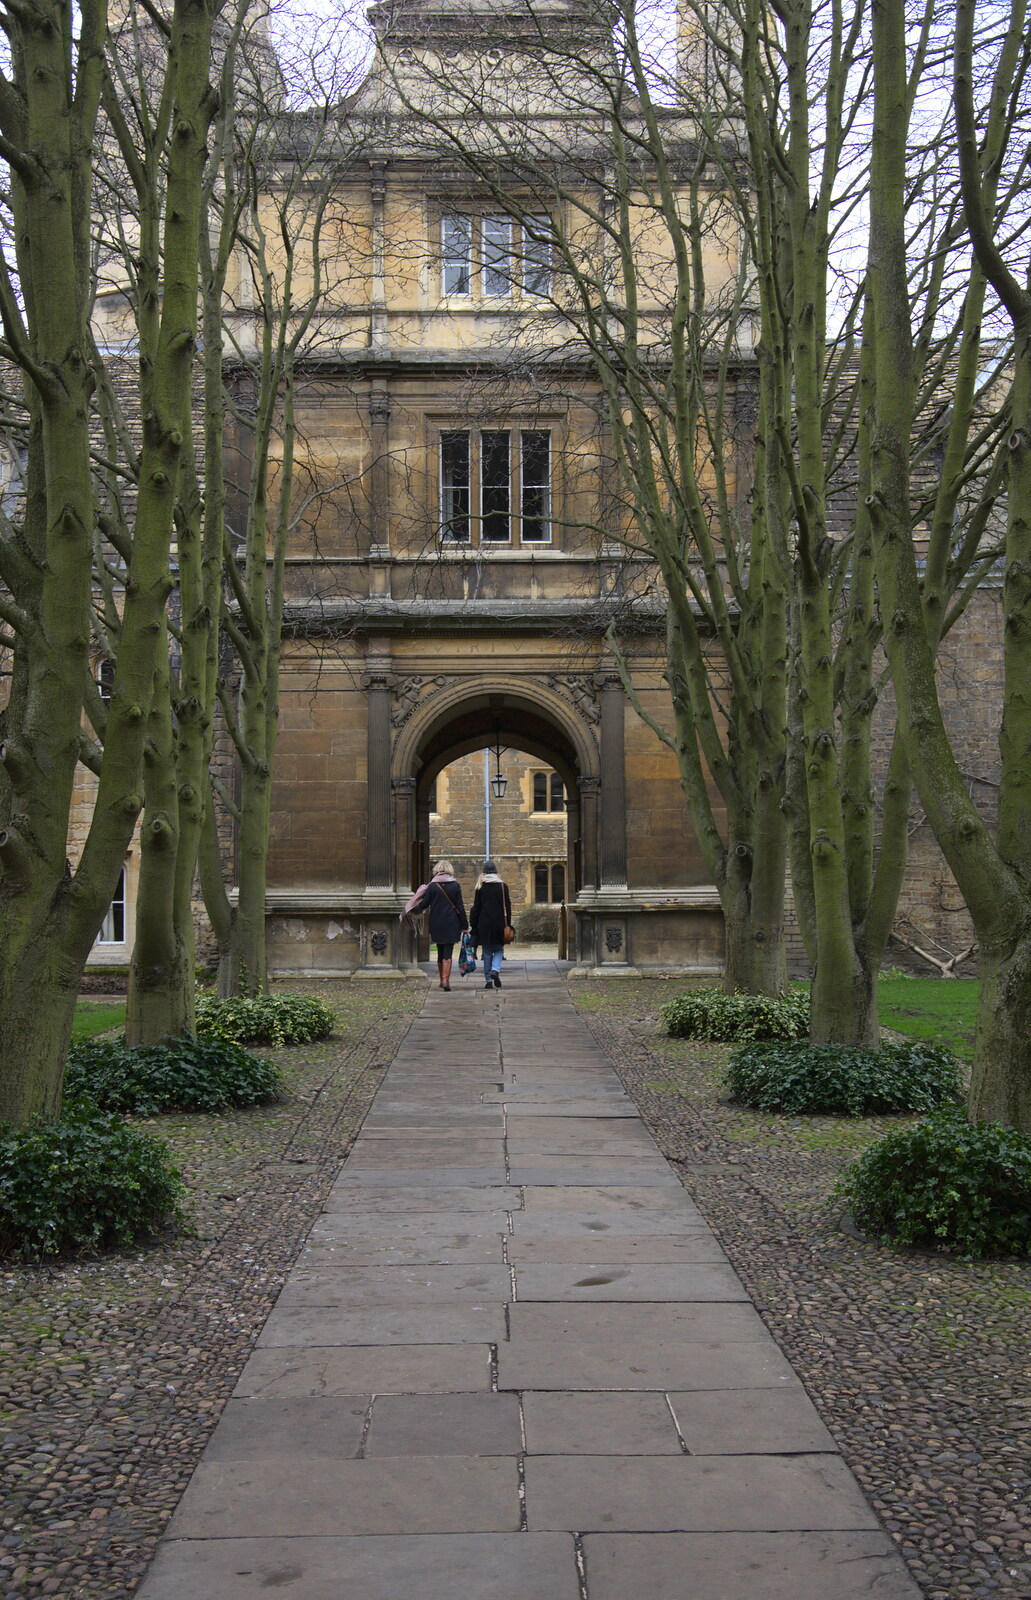 Gonville and Caius College is open to visitors from The SwiftKey Reunion Brunch, Regent Street, Cambridge - 12th January 2019